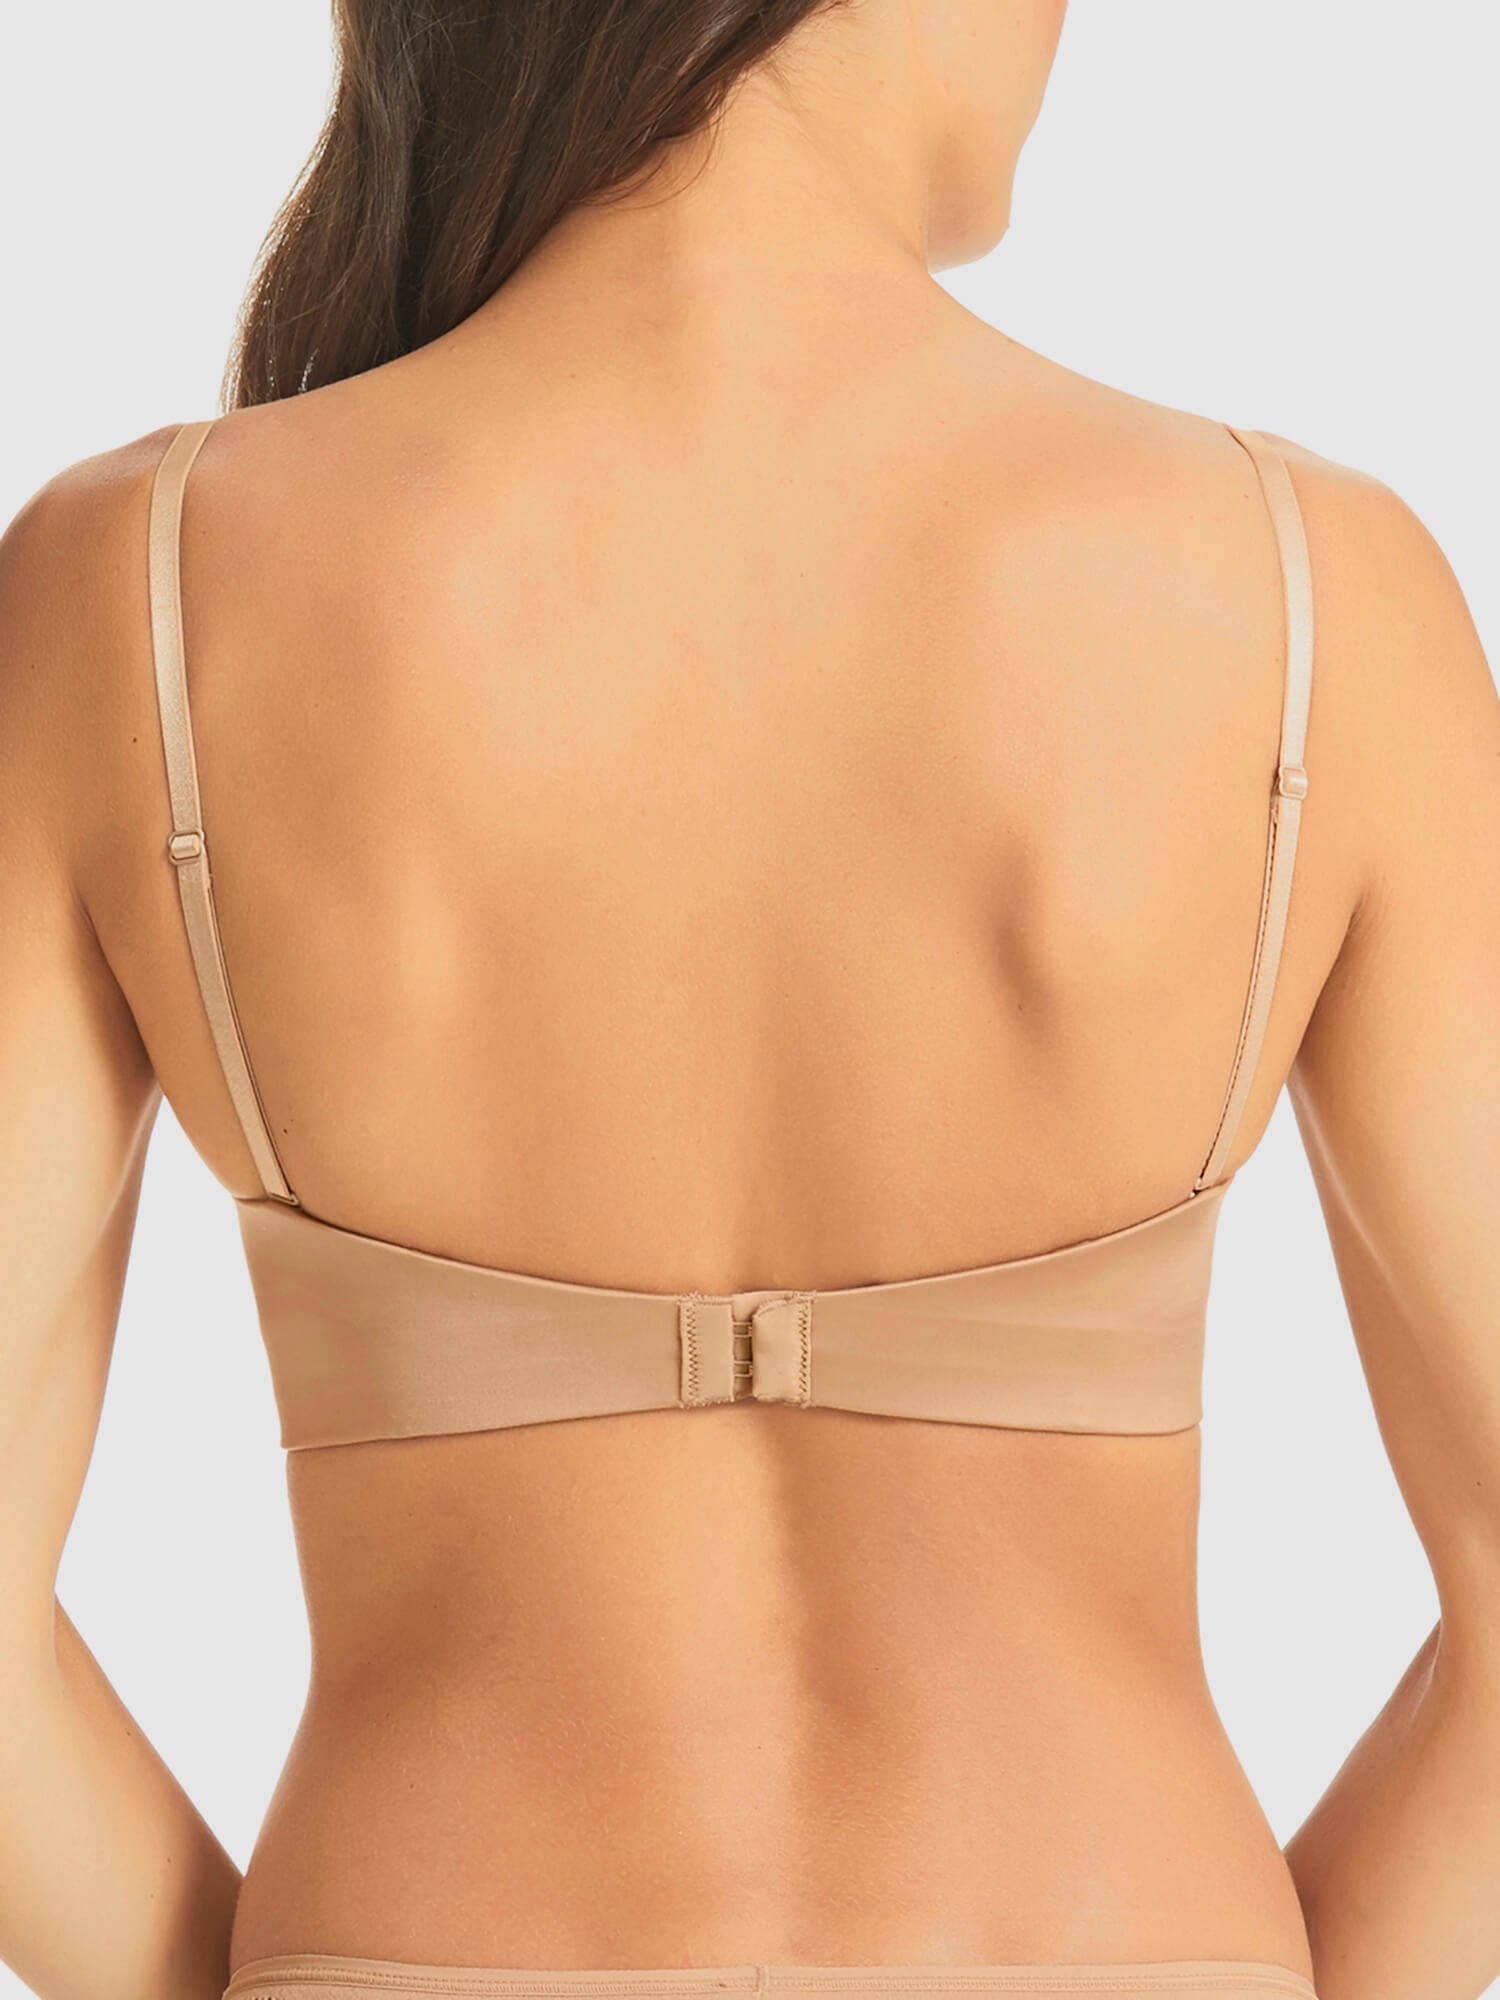 Fine Lines Refined 6 Way Low Cut Convertible Strapless Bra in Nude